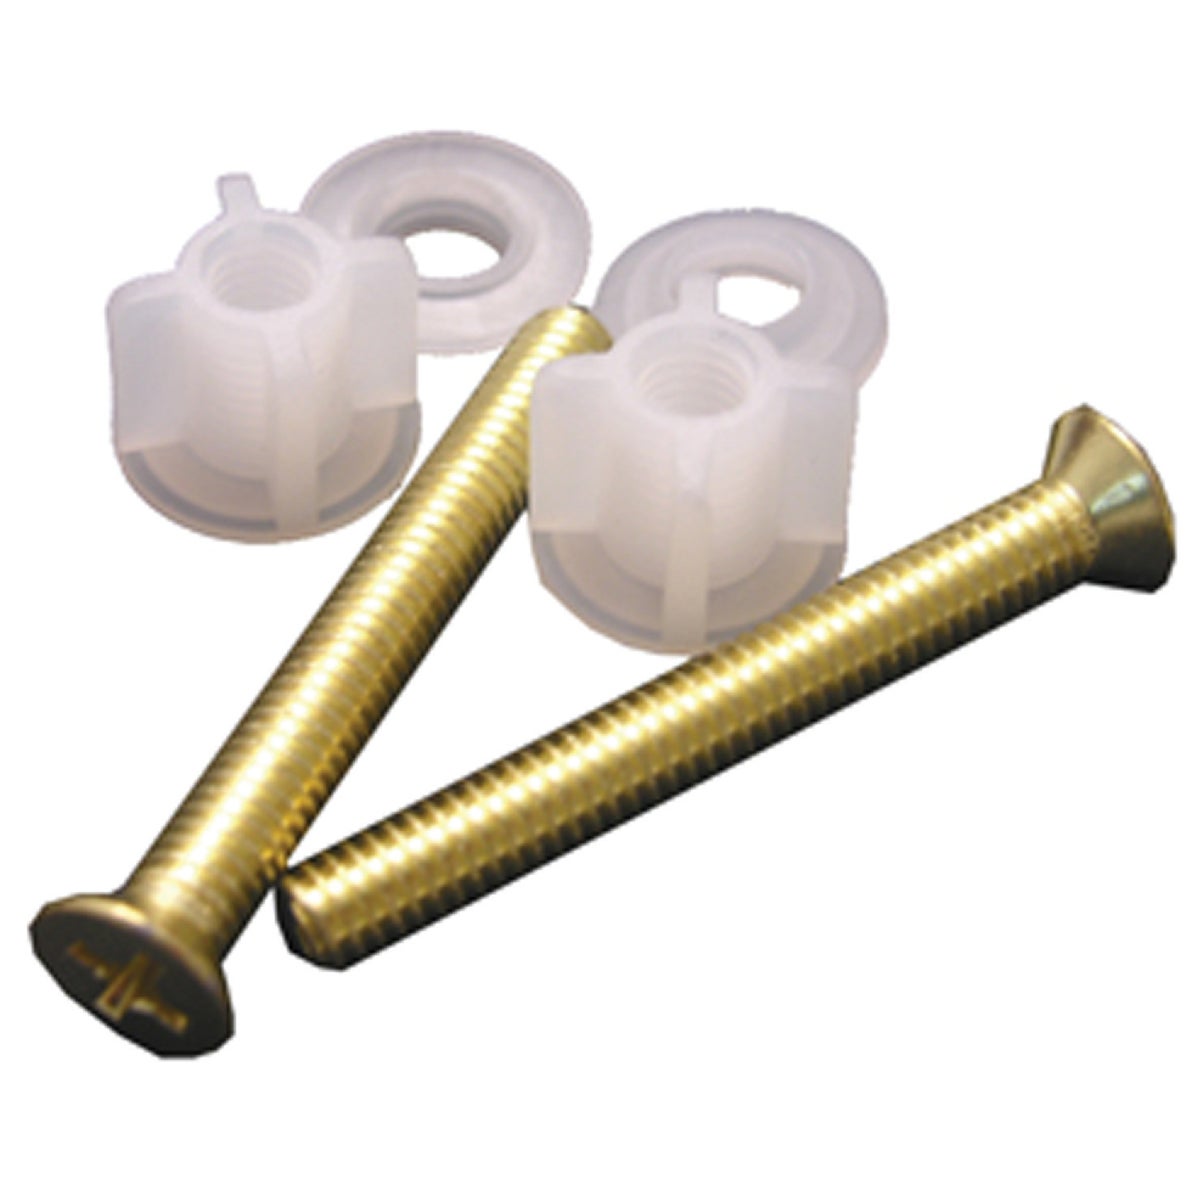 Lasco 3/8" x 2-1/2" Polished Brass Metal Toilet Seat Bolt, Includes Nuts and Washers